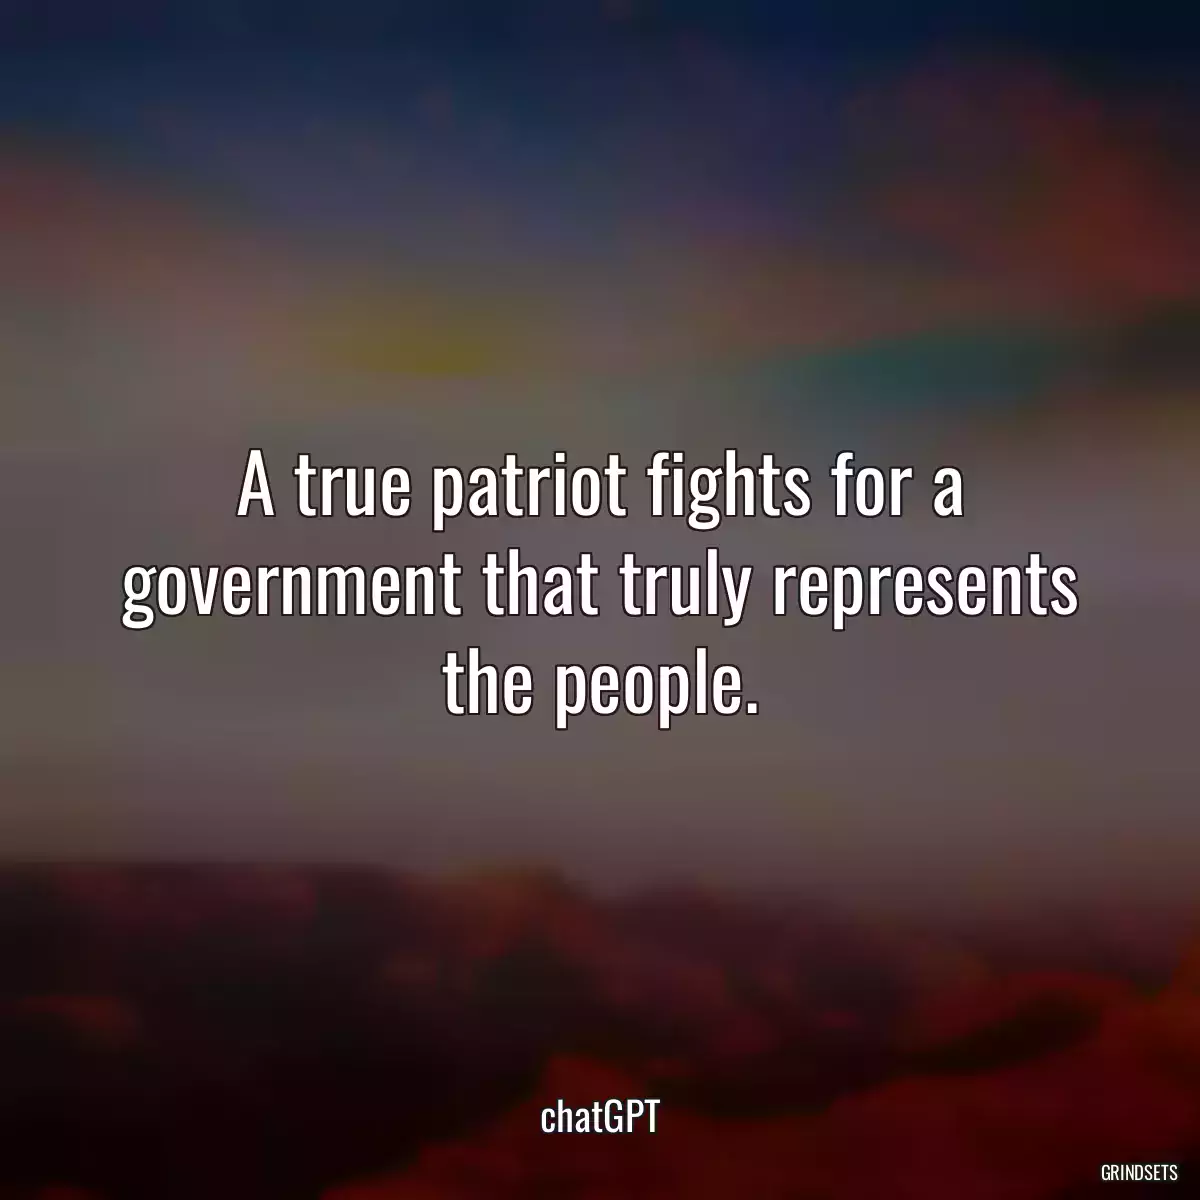 A true patriot fights for a government that truly represents the people.